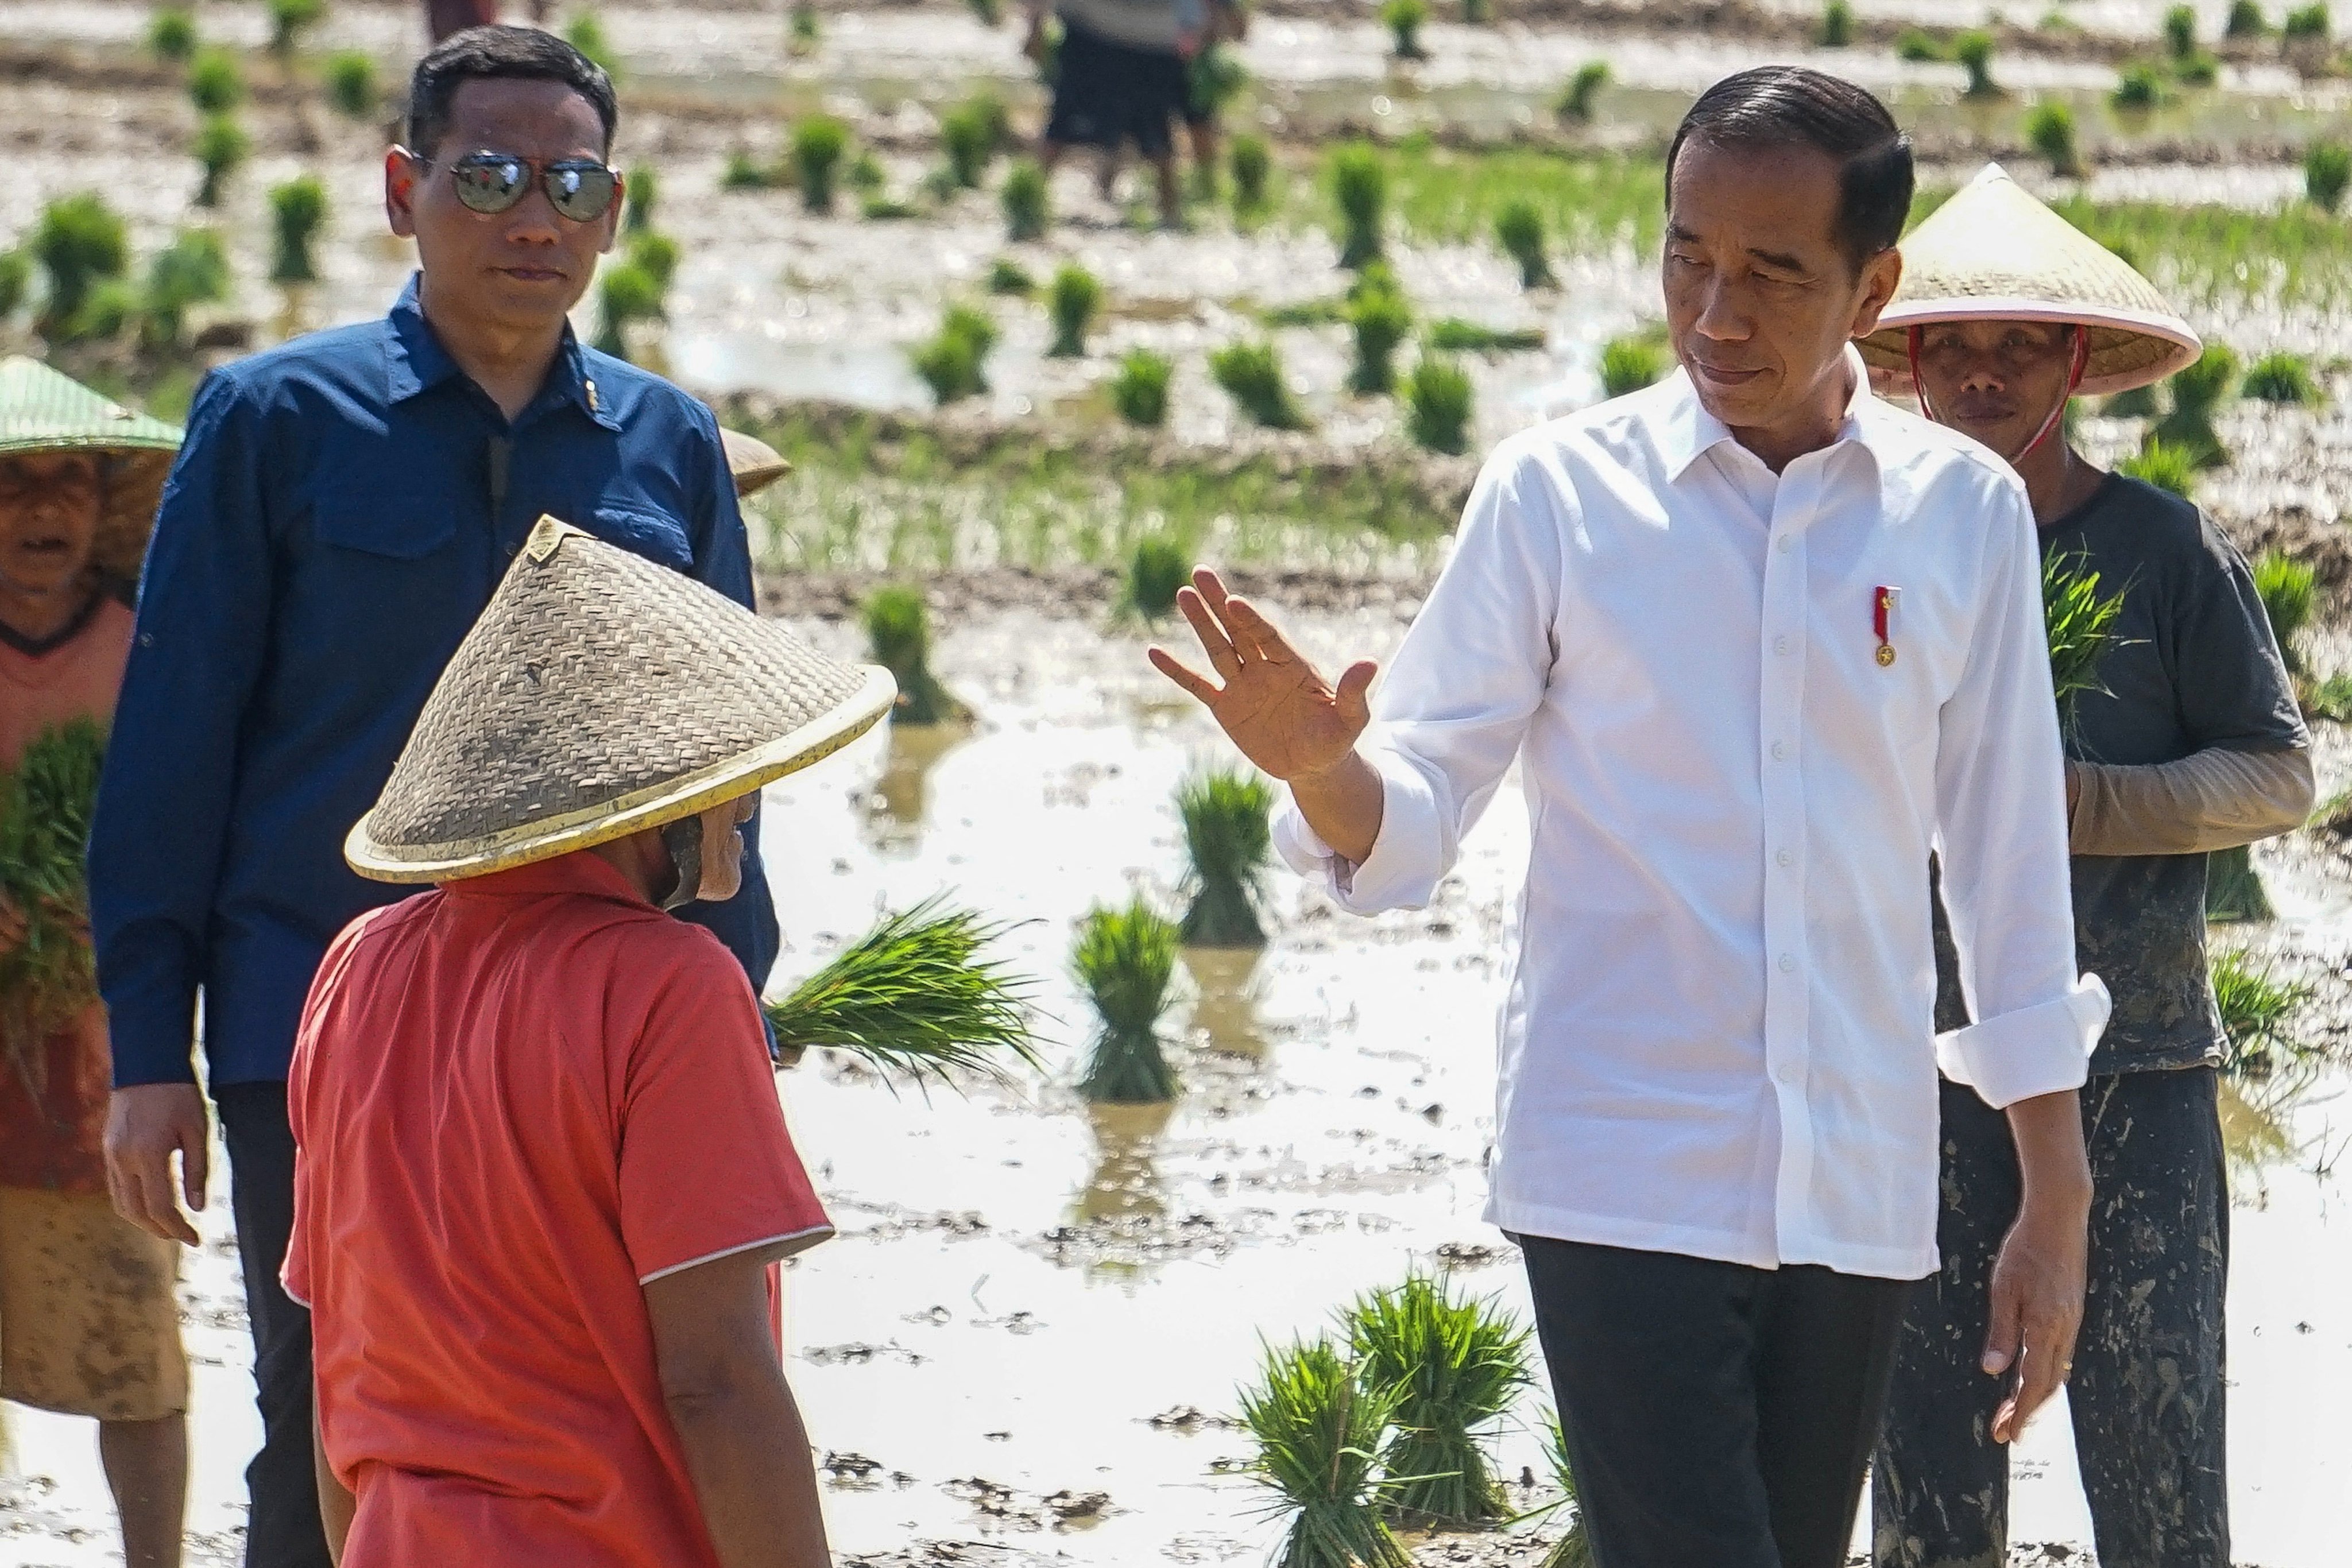 Indonesian President Joko Widodo greets a farmer at the paddy field area in Pekalongan, Central Java province. Indonesia has been a key partner of the OECD since 2007 and Widodo has ramped up the nation’s efforts to join the group. Photo: Reuters